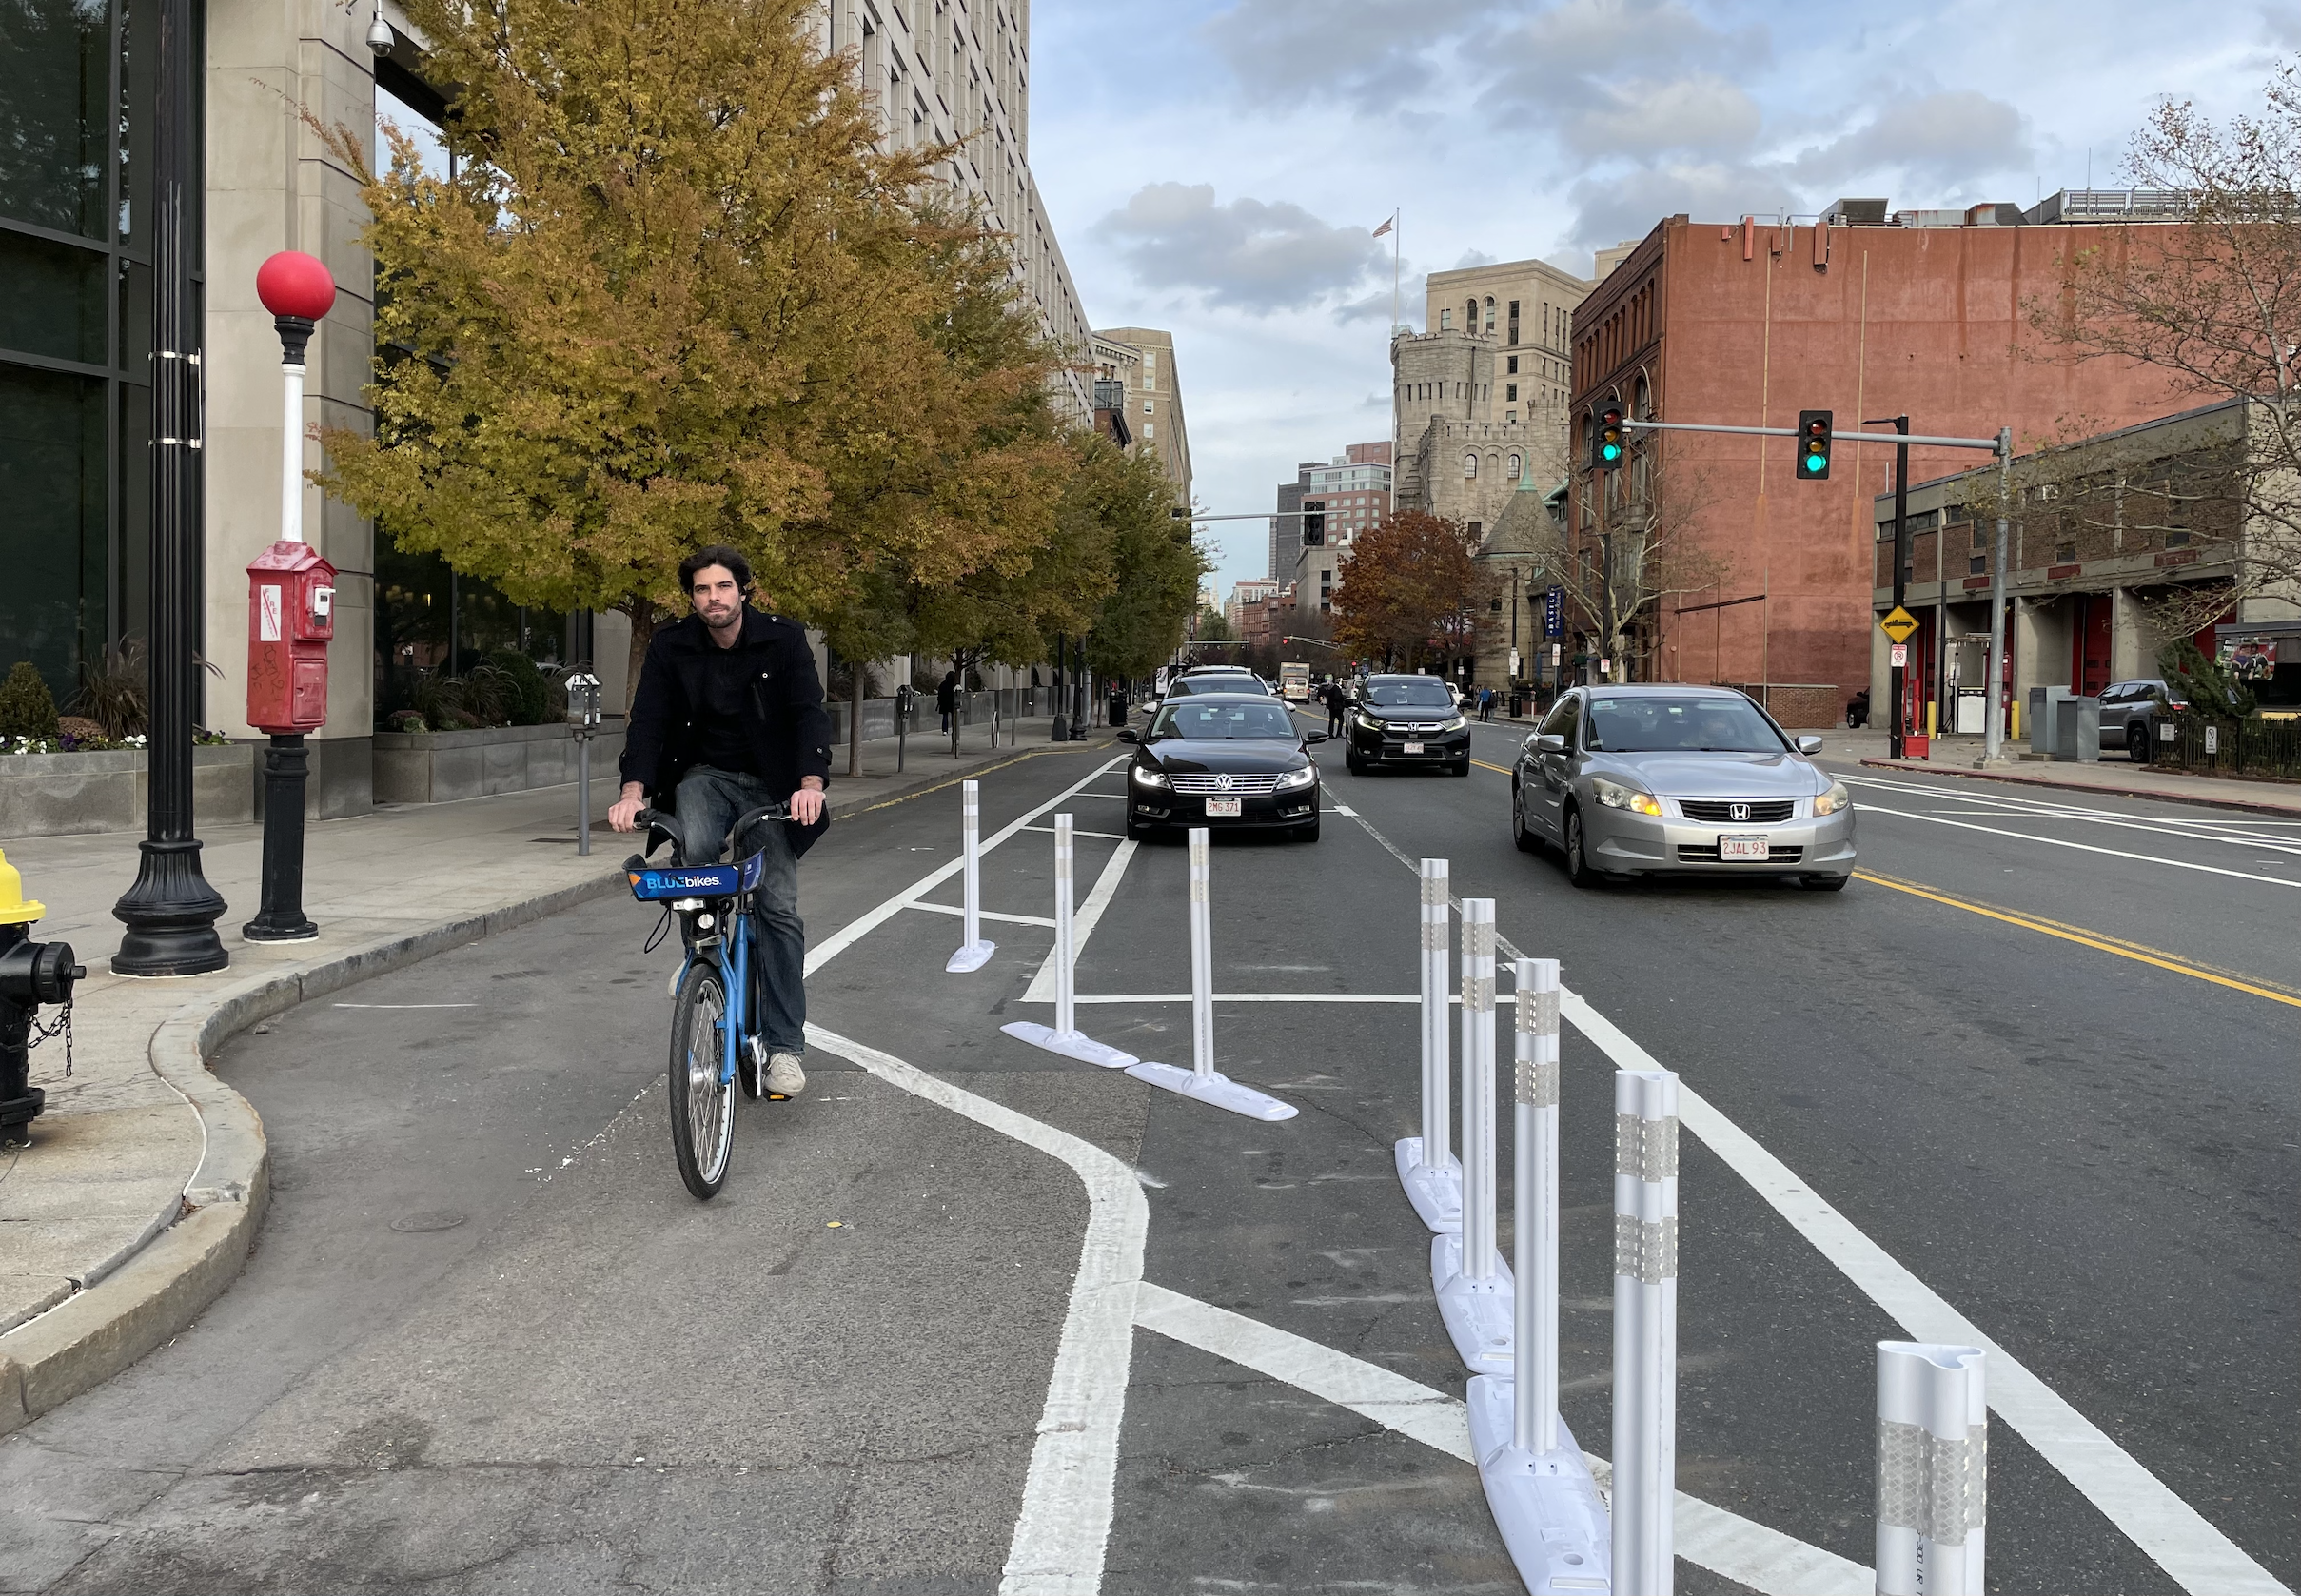 A man rides a Bluebike towards the camera in a separated bike lane that runs between the sidewalk (left) and a row of parked cars (center). A row of flexible-post bollards in the foreground divides the bike lane from moving traffic. The street is lined with multi-story buildings.